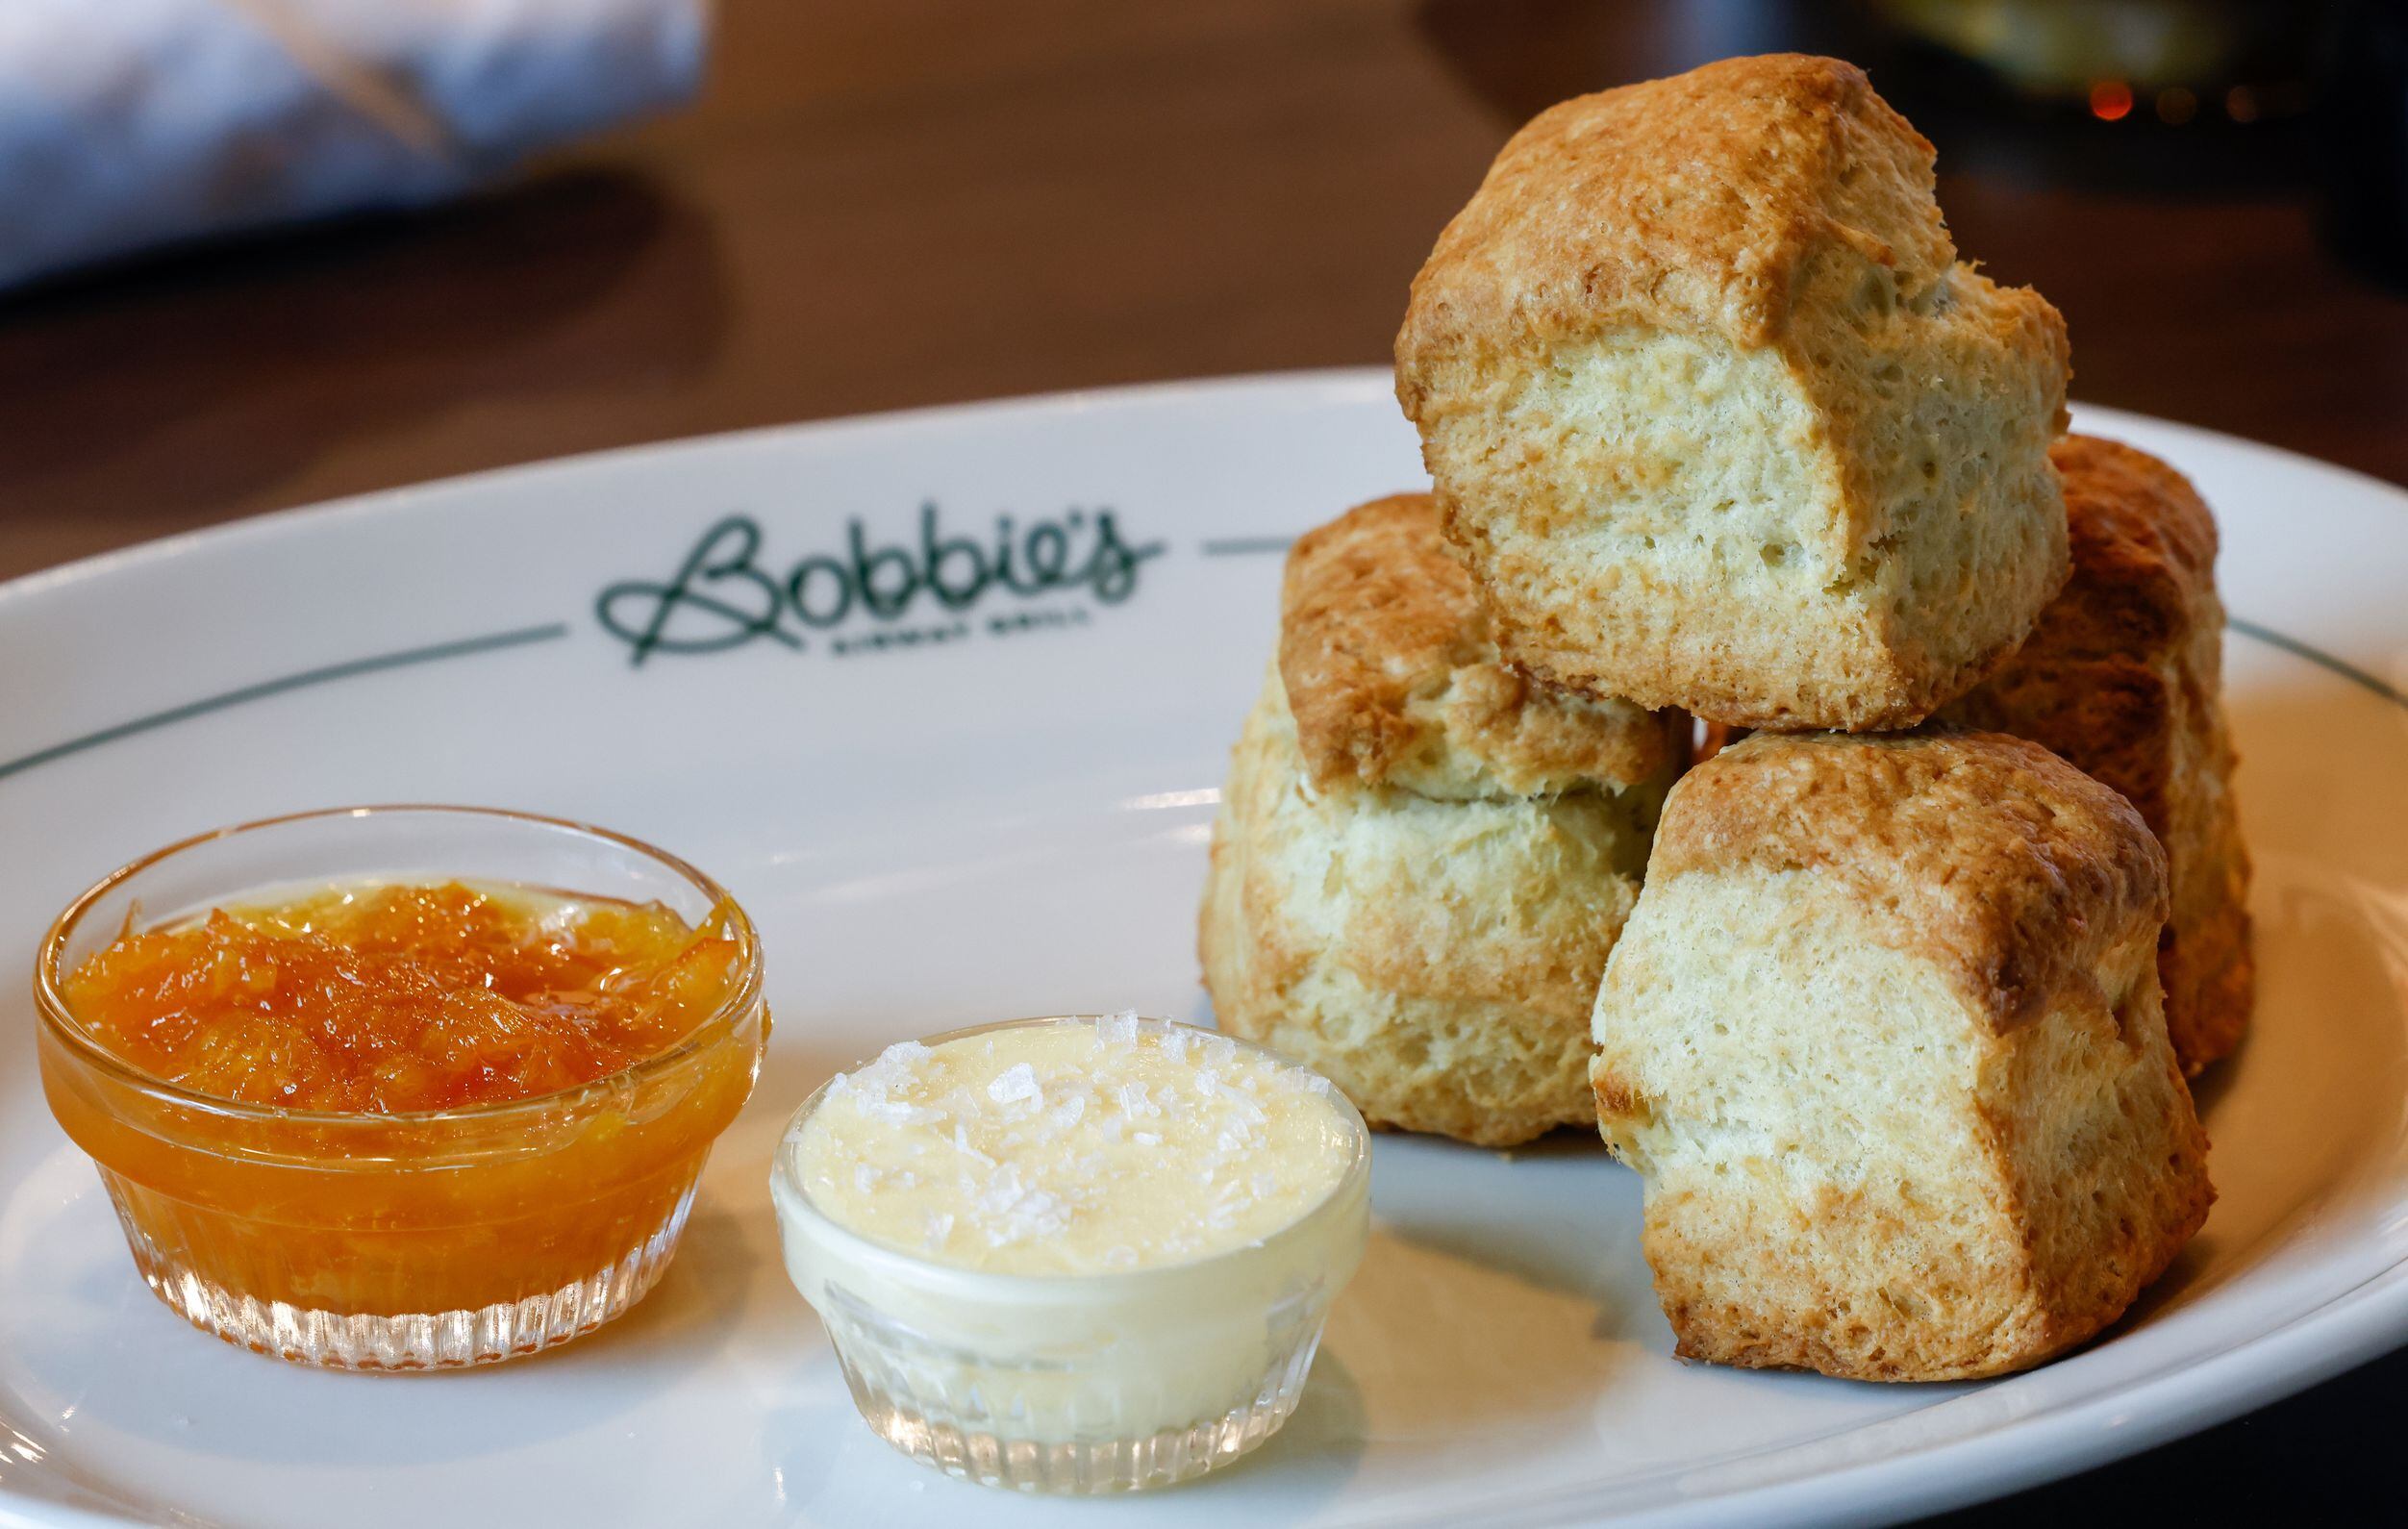 Buttermilk Biscuits are served with orange marmalade (left) and Beurre de Baratte at new...